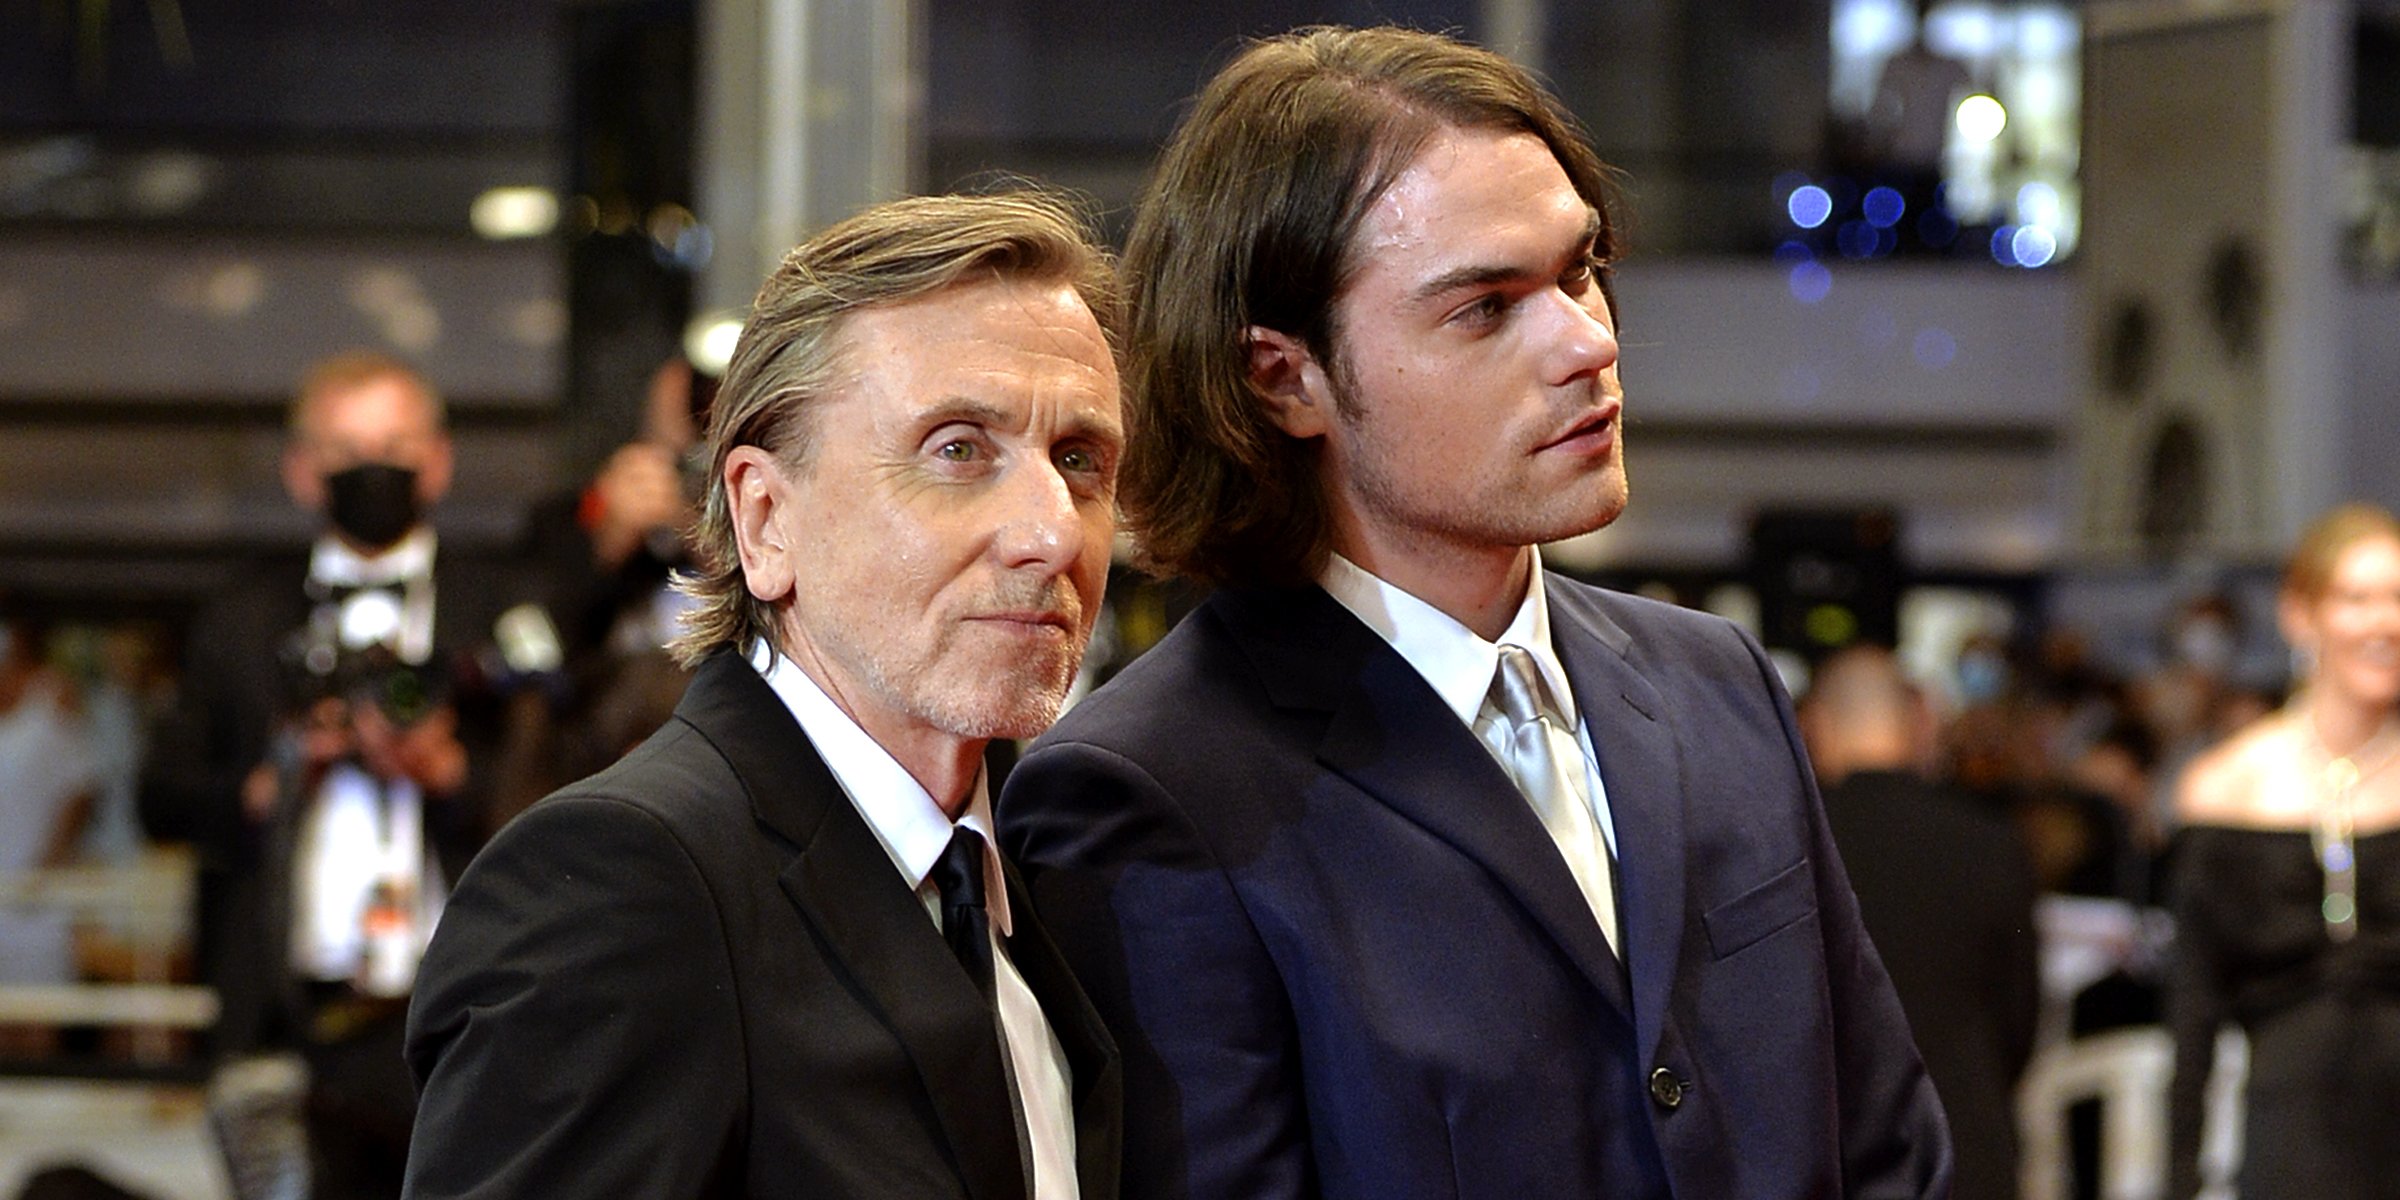 Tim Roth and his son Cormac Roth  | Source: Getty Images